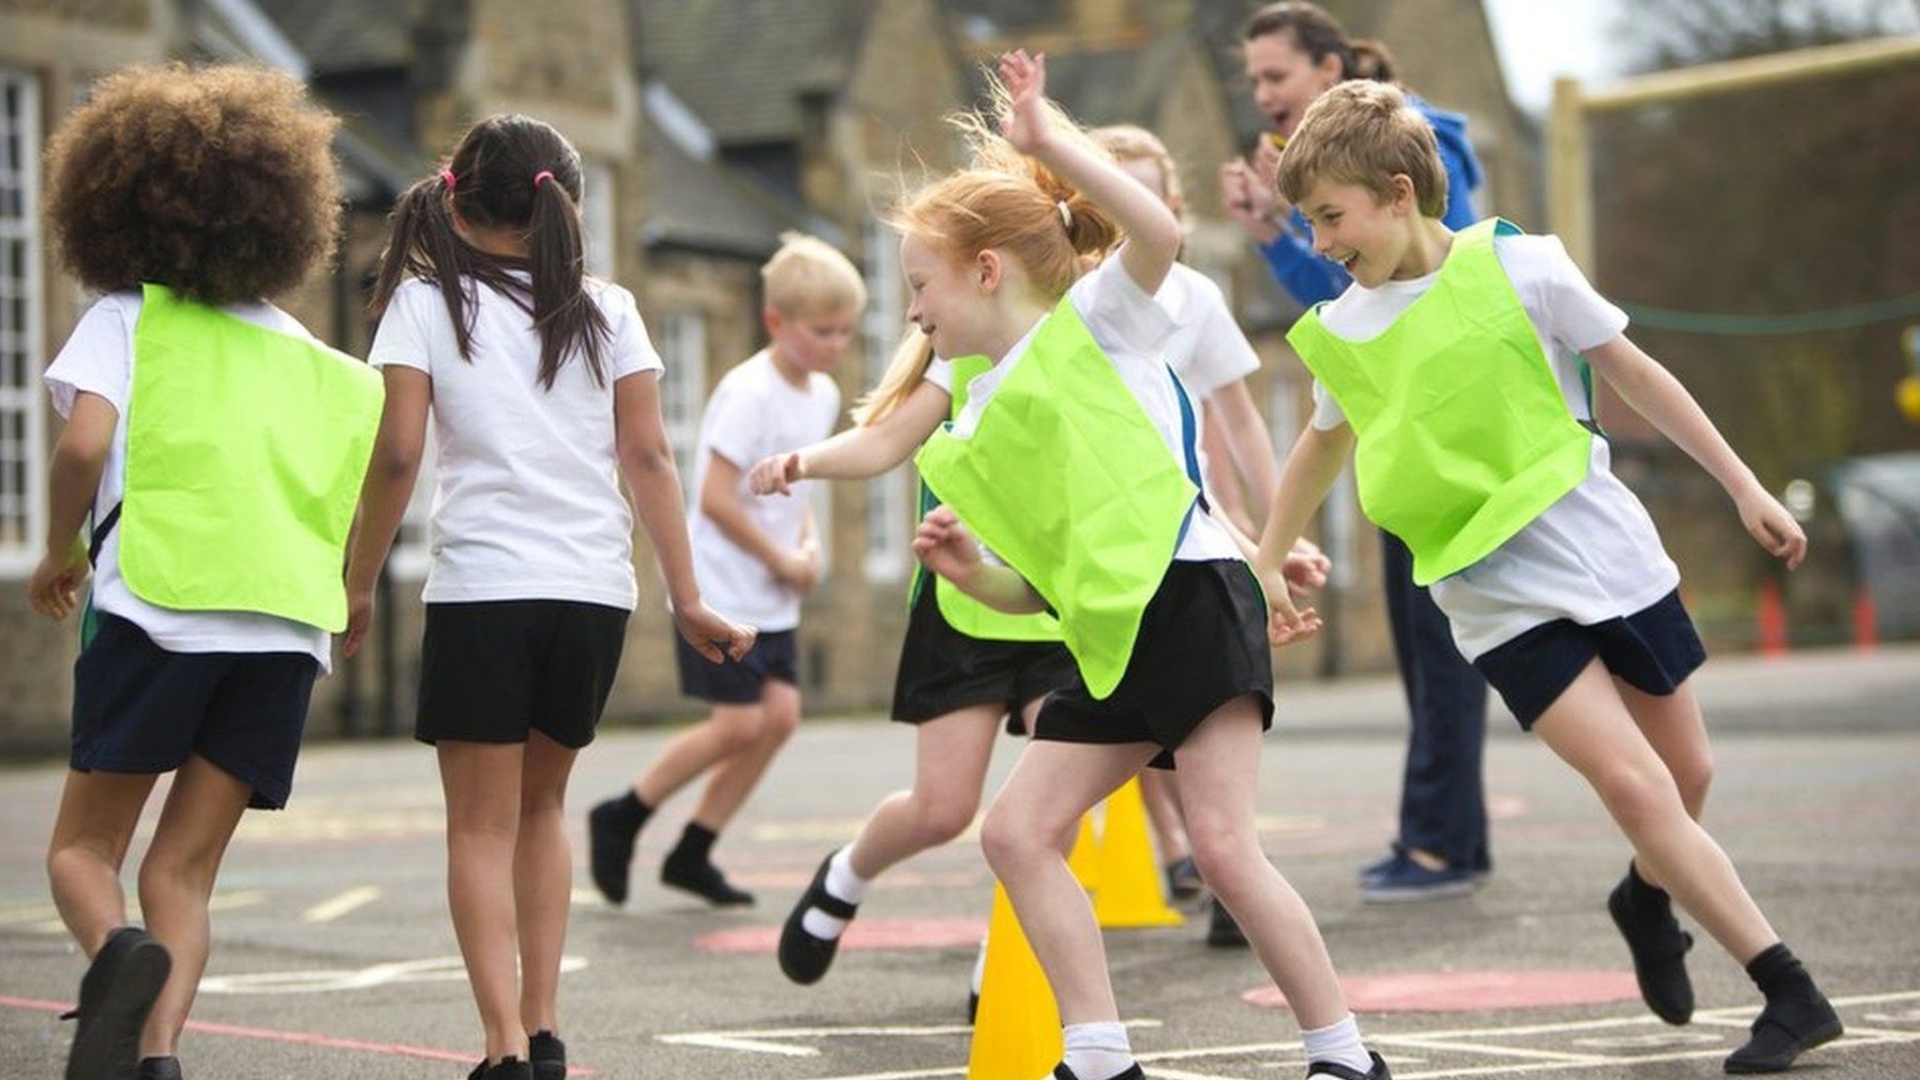 Primary school children doing exercise in the playground